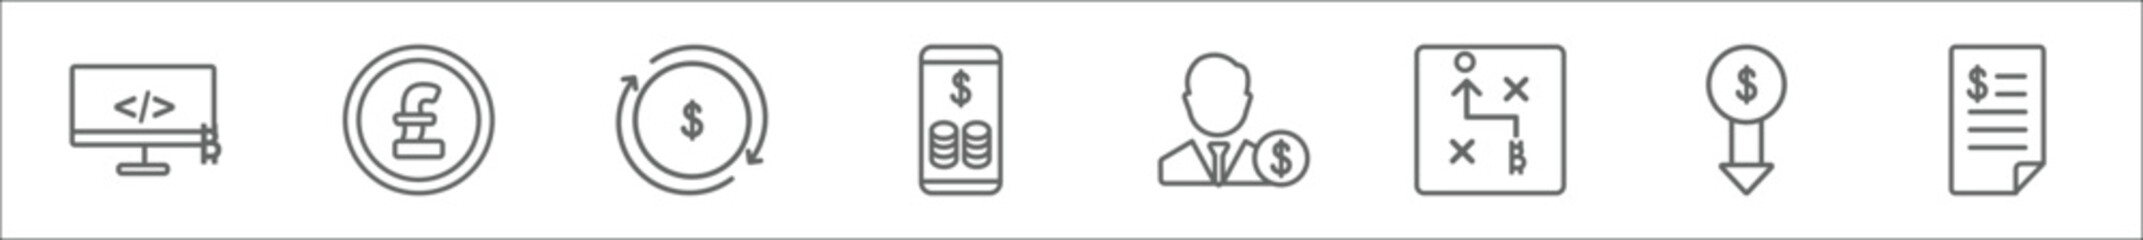 outline set of economyandfinance line icons. linear vector icons such as programming, pound sterling, dollar reload, digital wallet, banker, tactical, loss, invoice